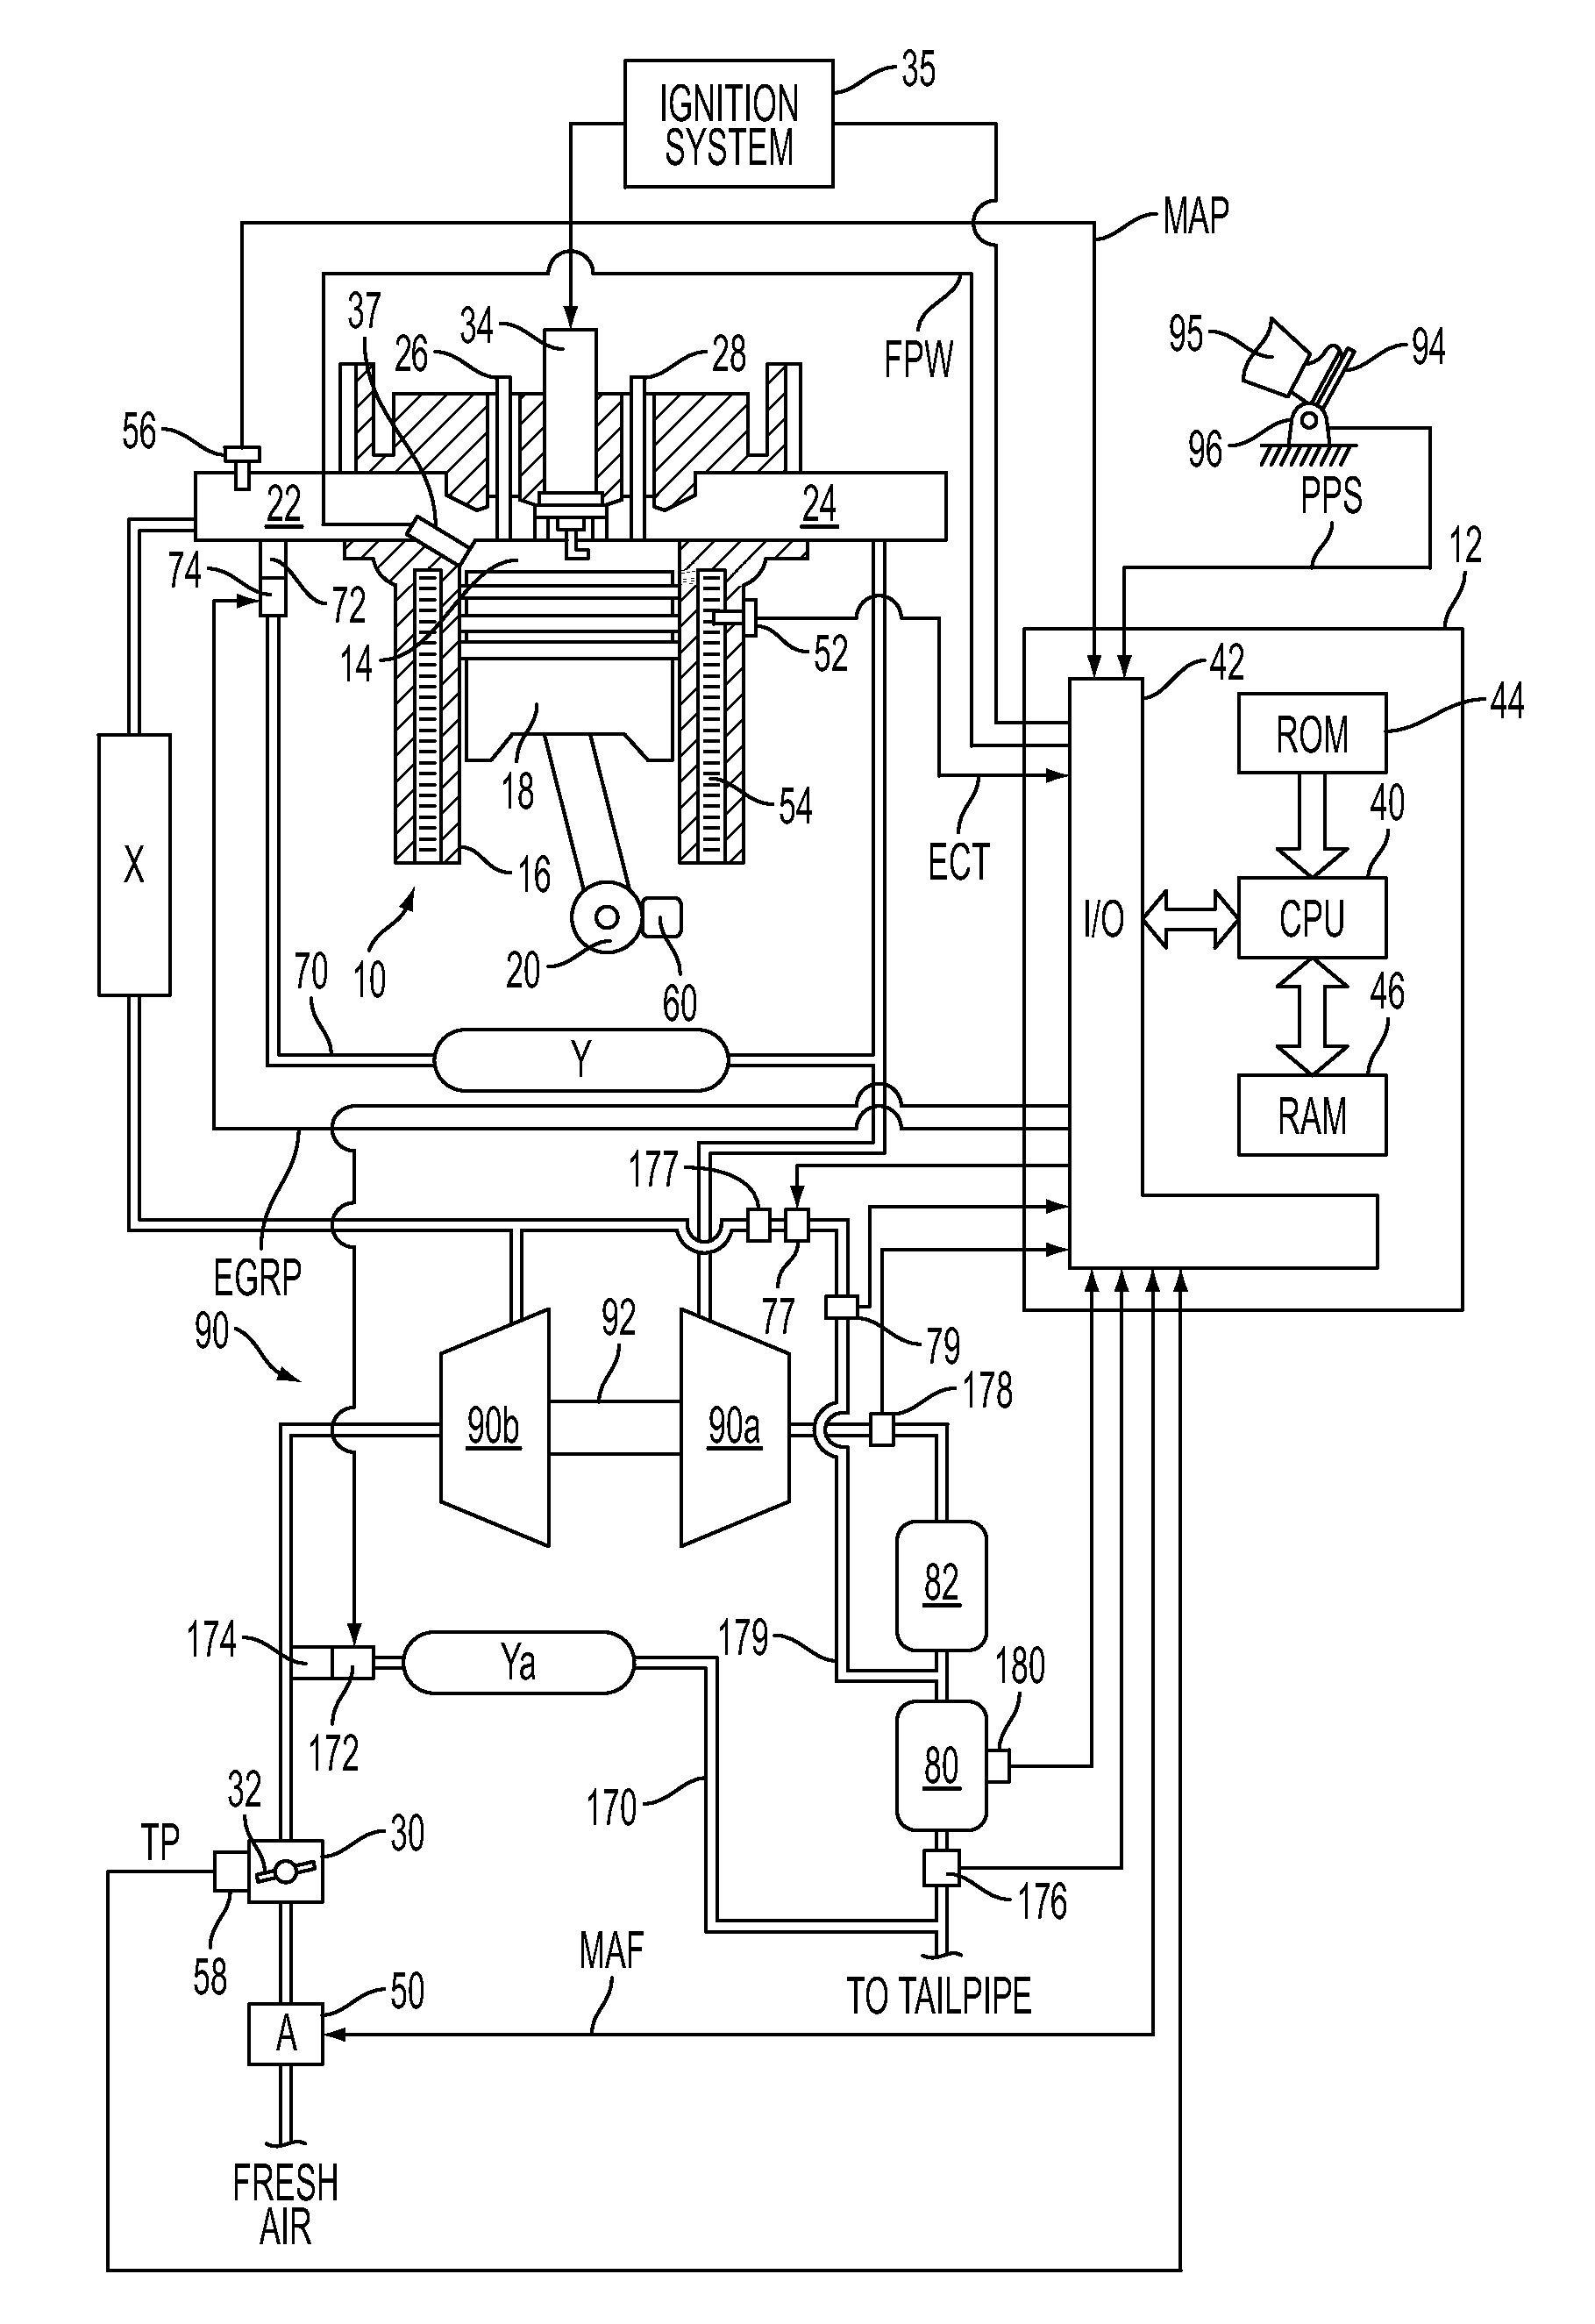 System for regenerating a particulate filter and controlling EGR